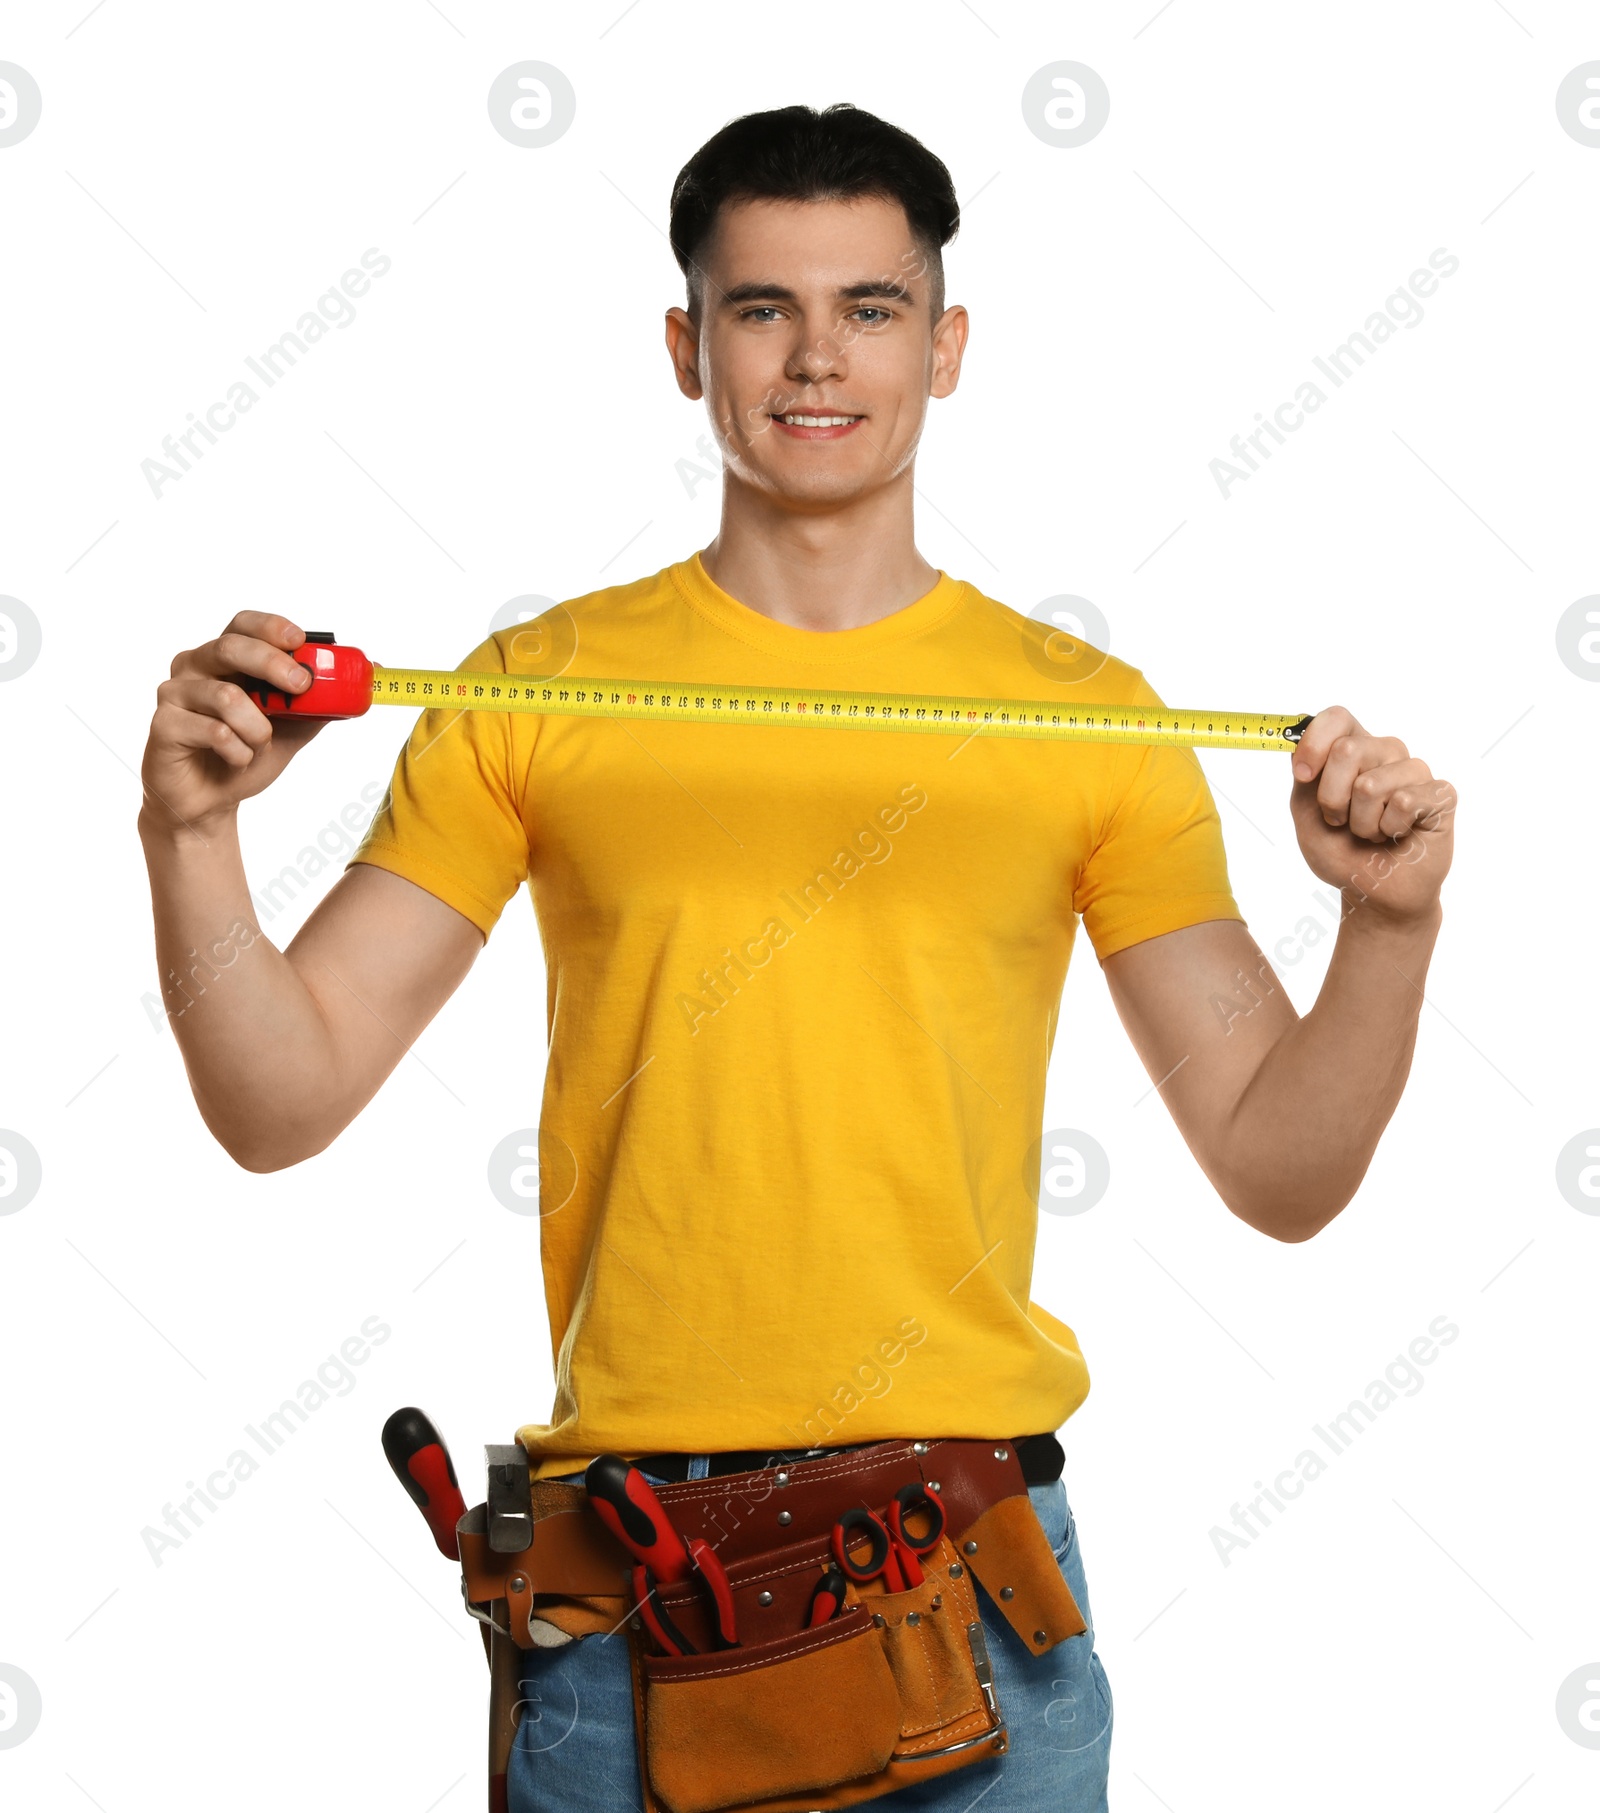 Photo of Handyman with measuring tape and tool belt isolated on white